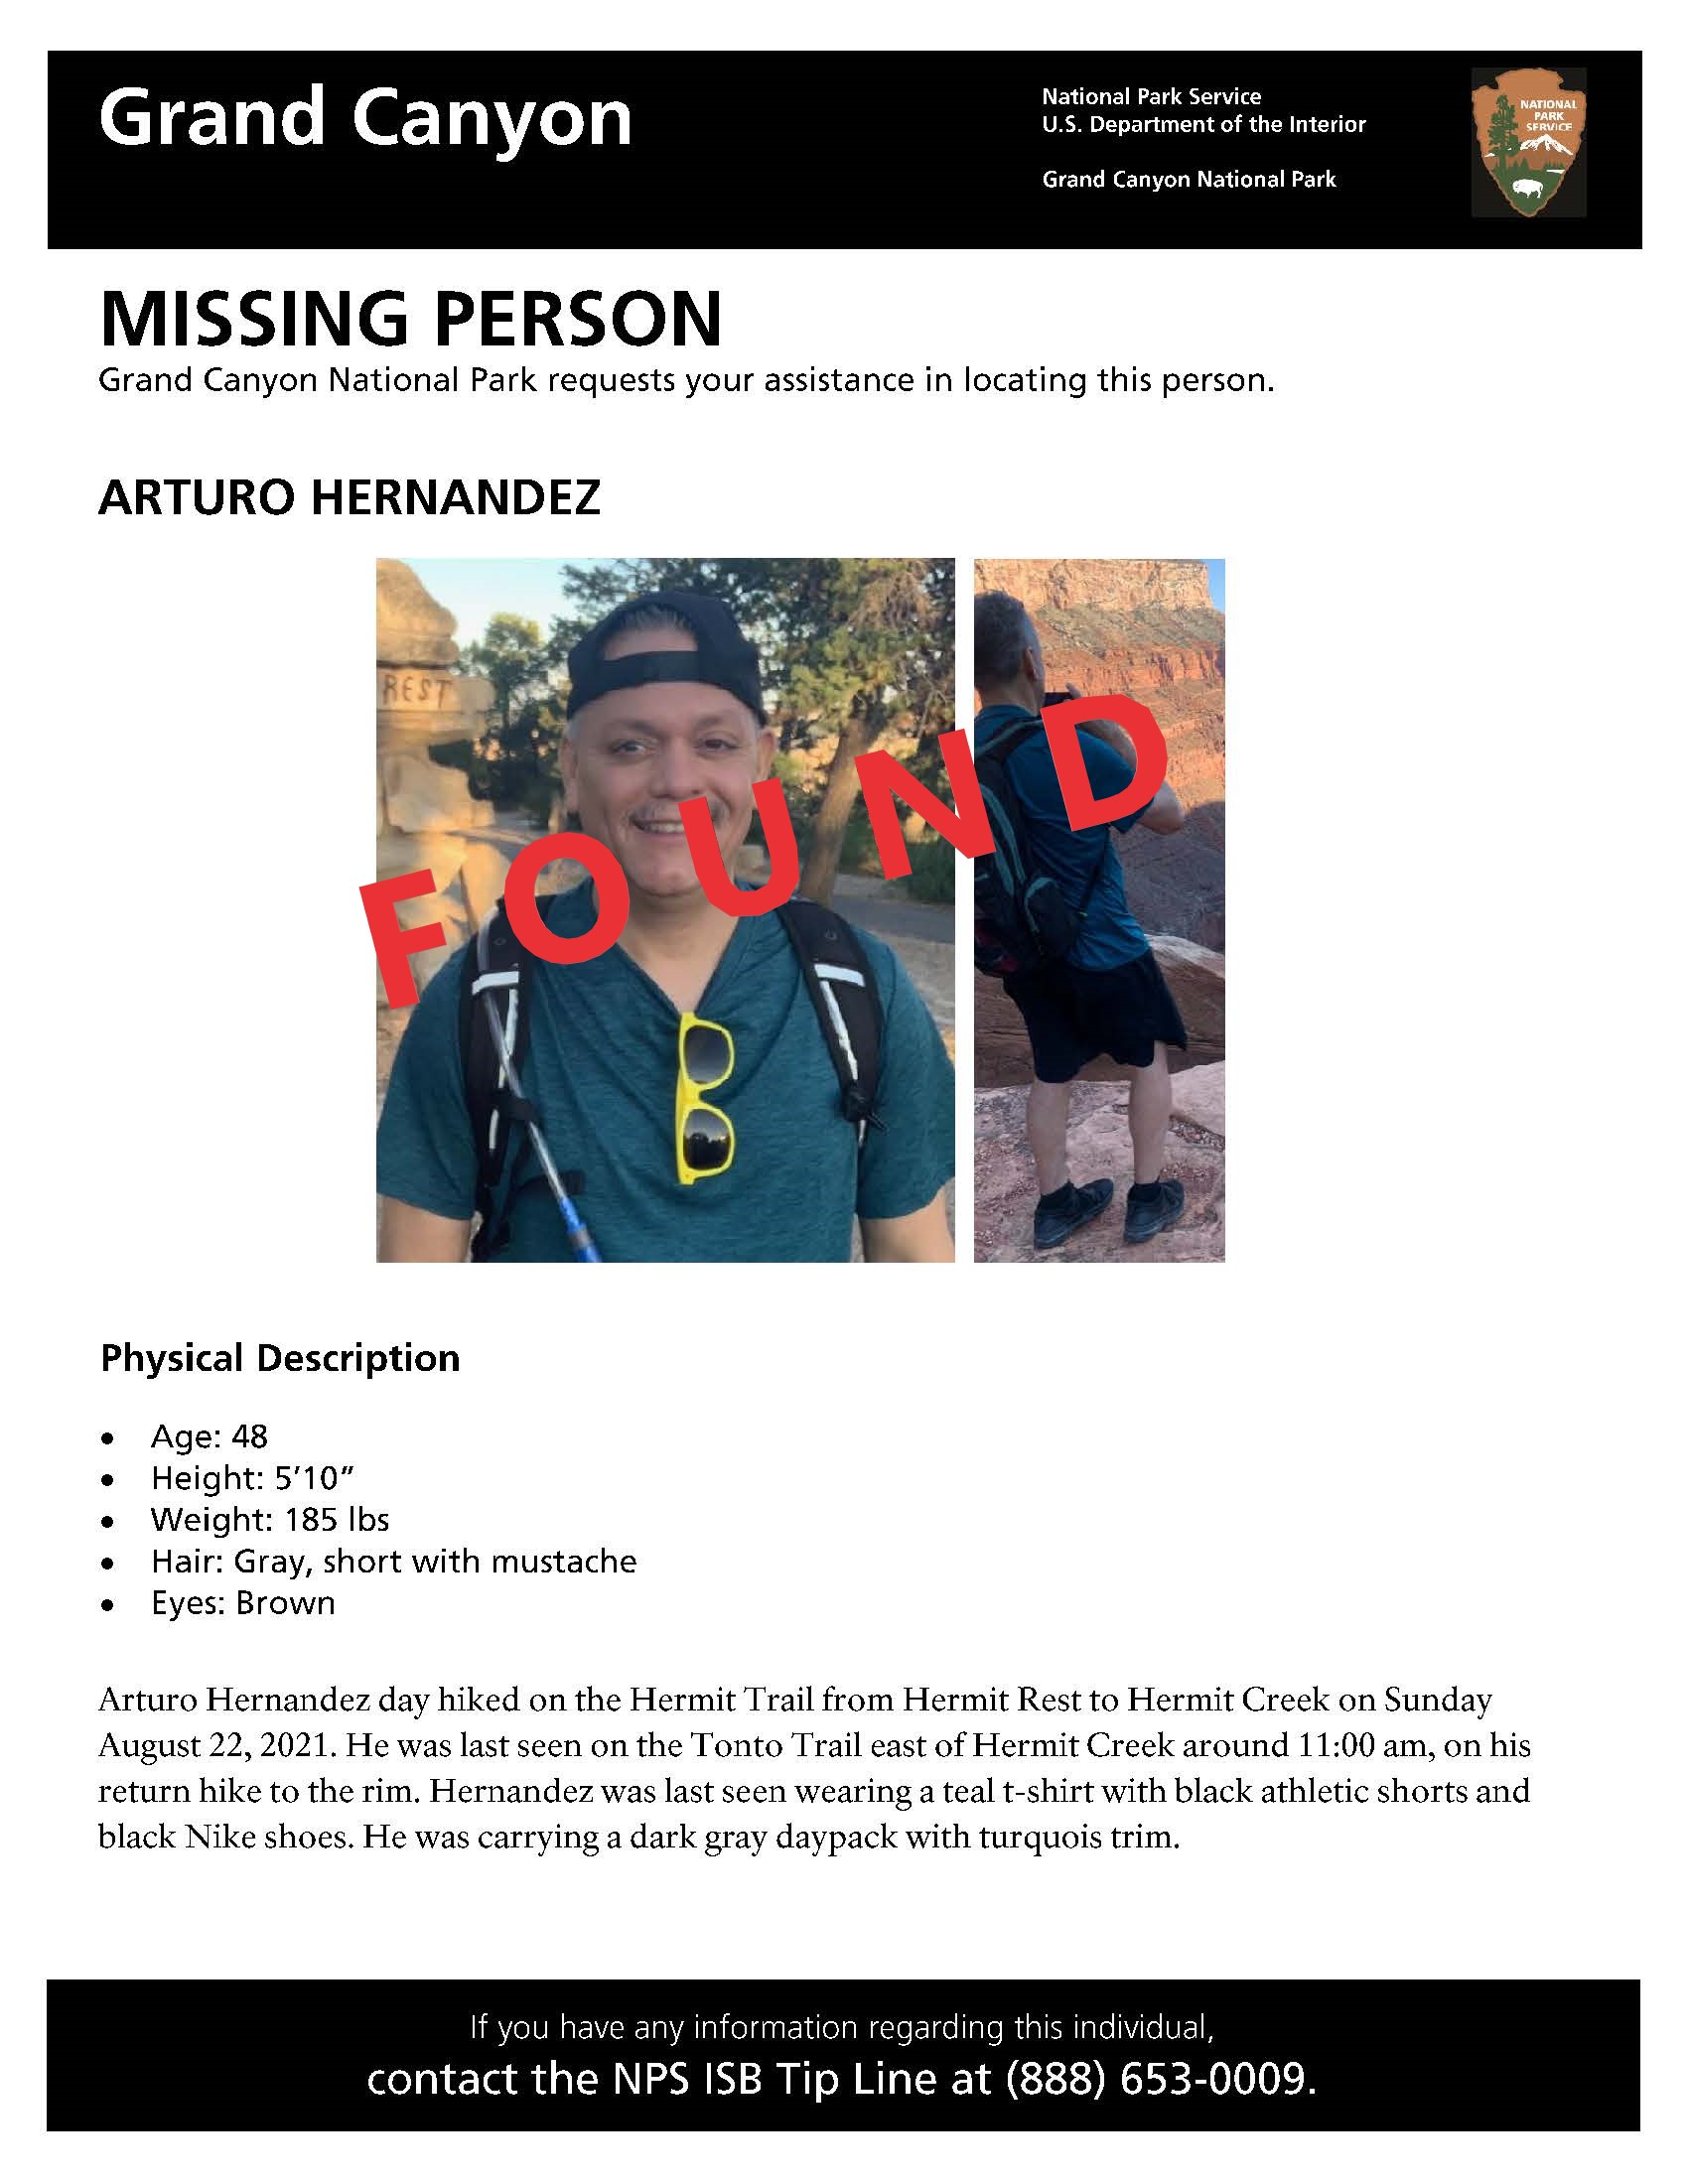 Missing person flyer with red letters "found" over top